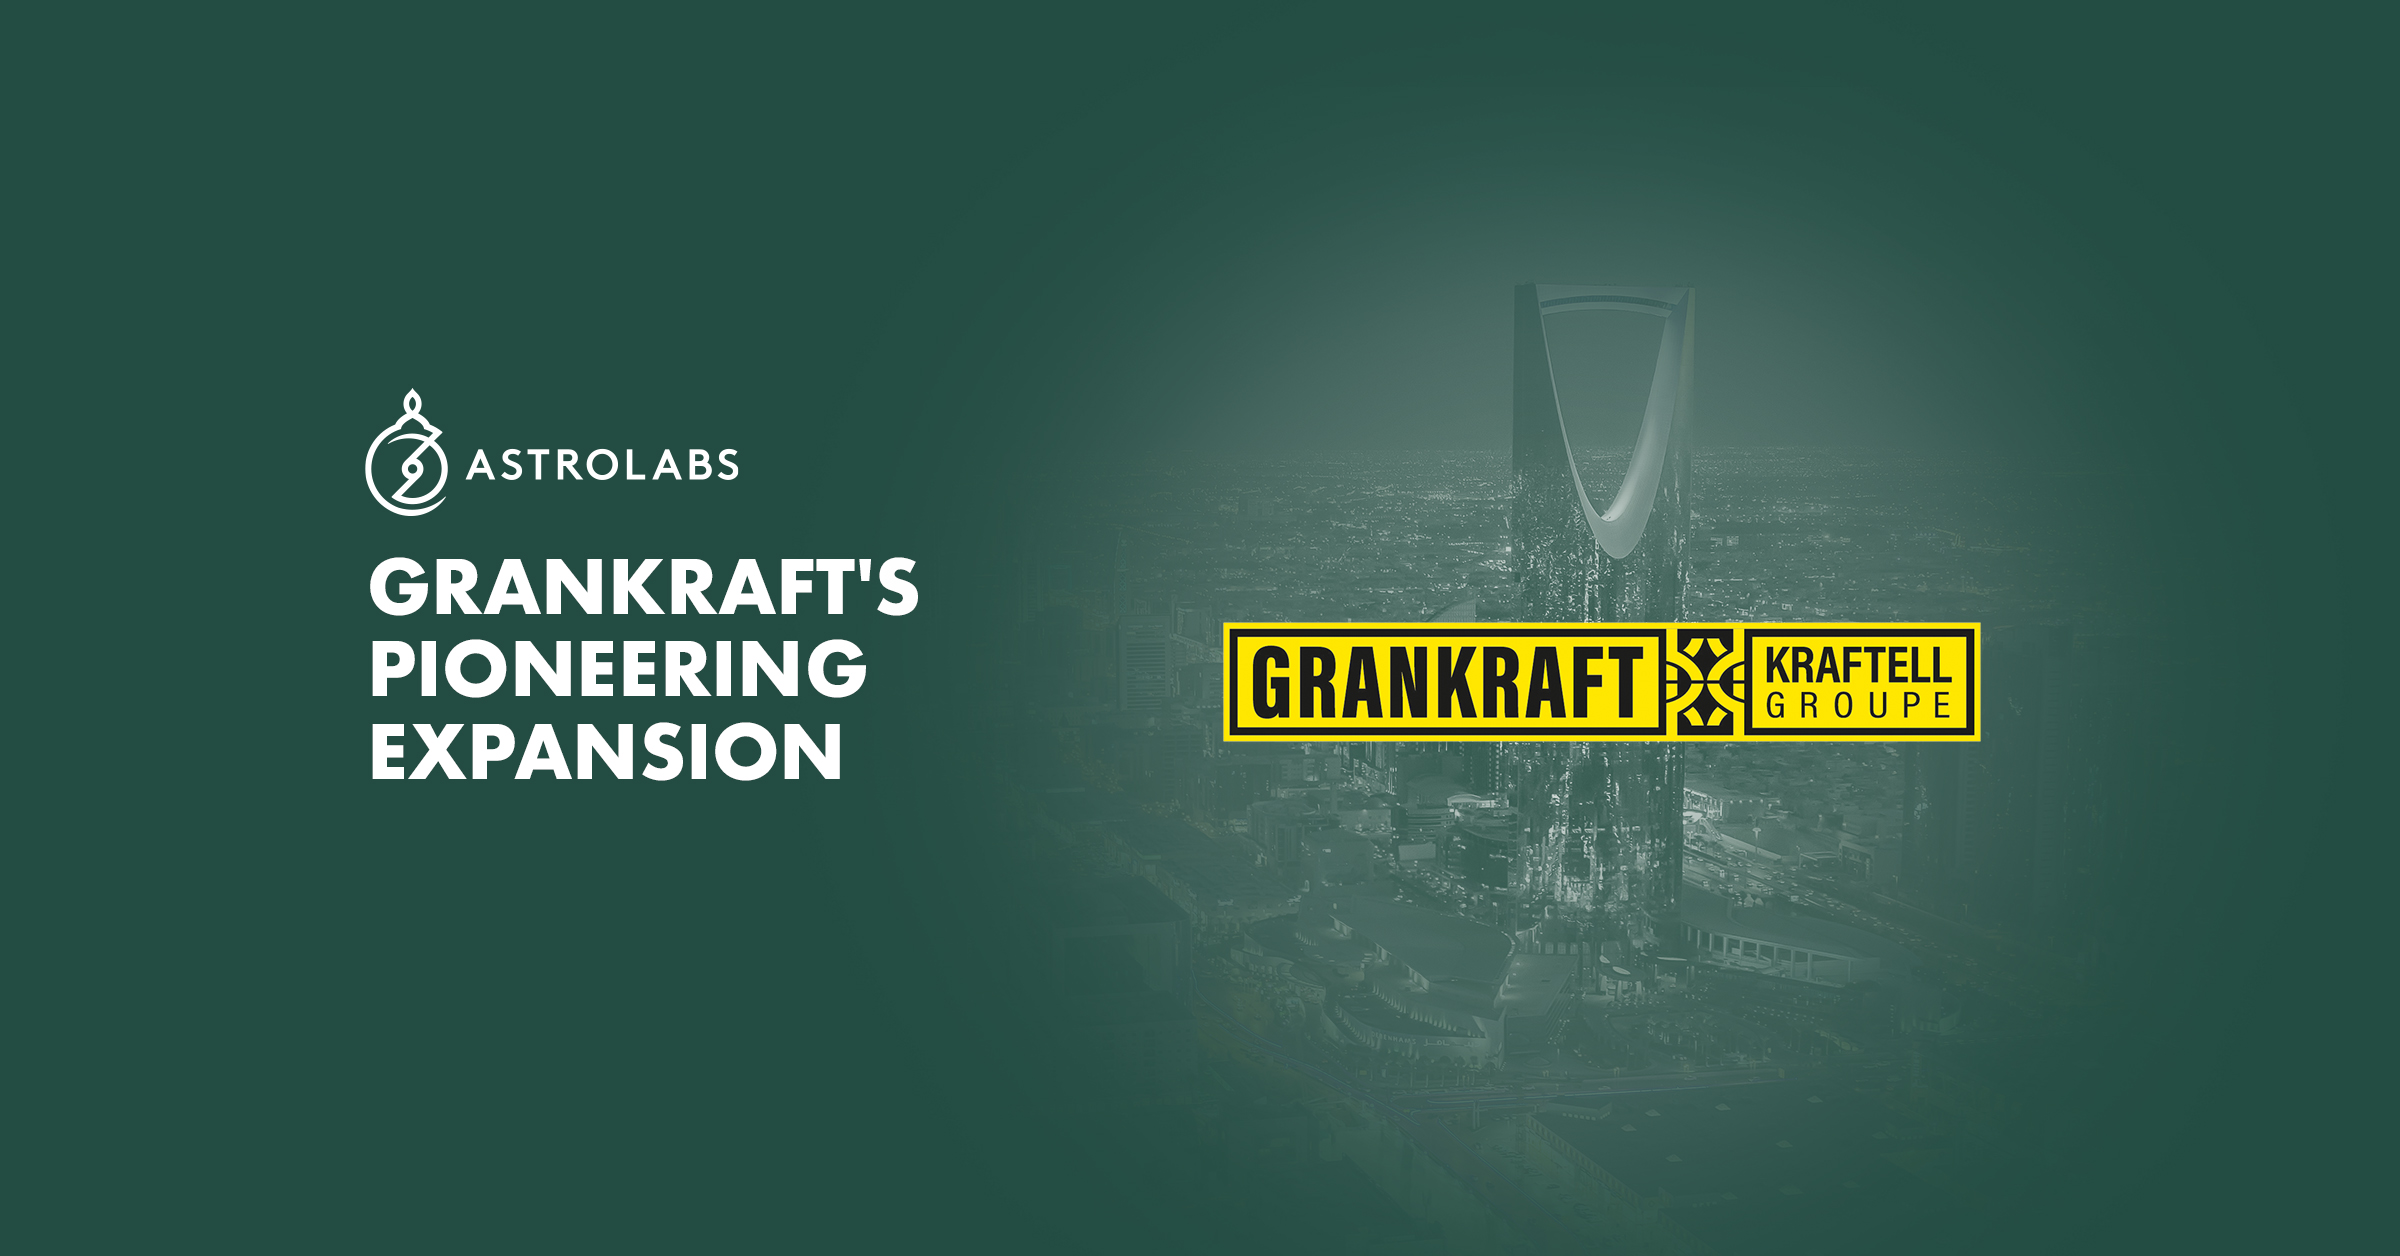 A picture of Riyadh city, with the logo of Grankraft, and a title, Grankraft pioneering expansion, focusing on how Grankraft has become a leading company in the Saudi construction market